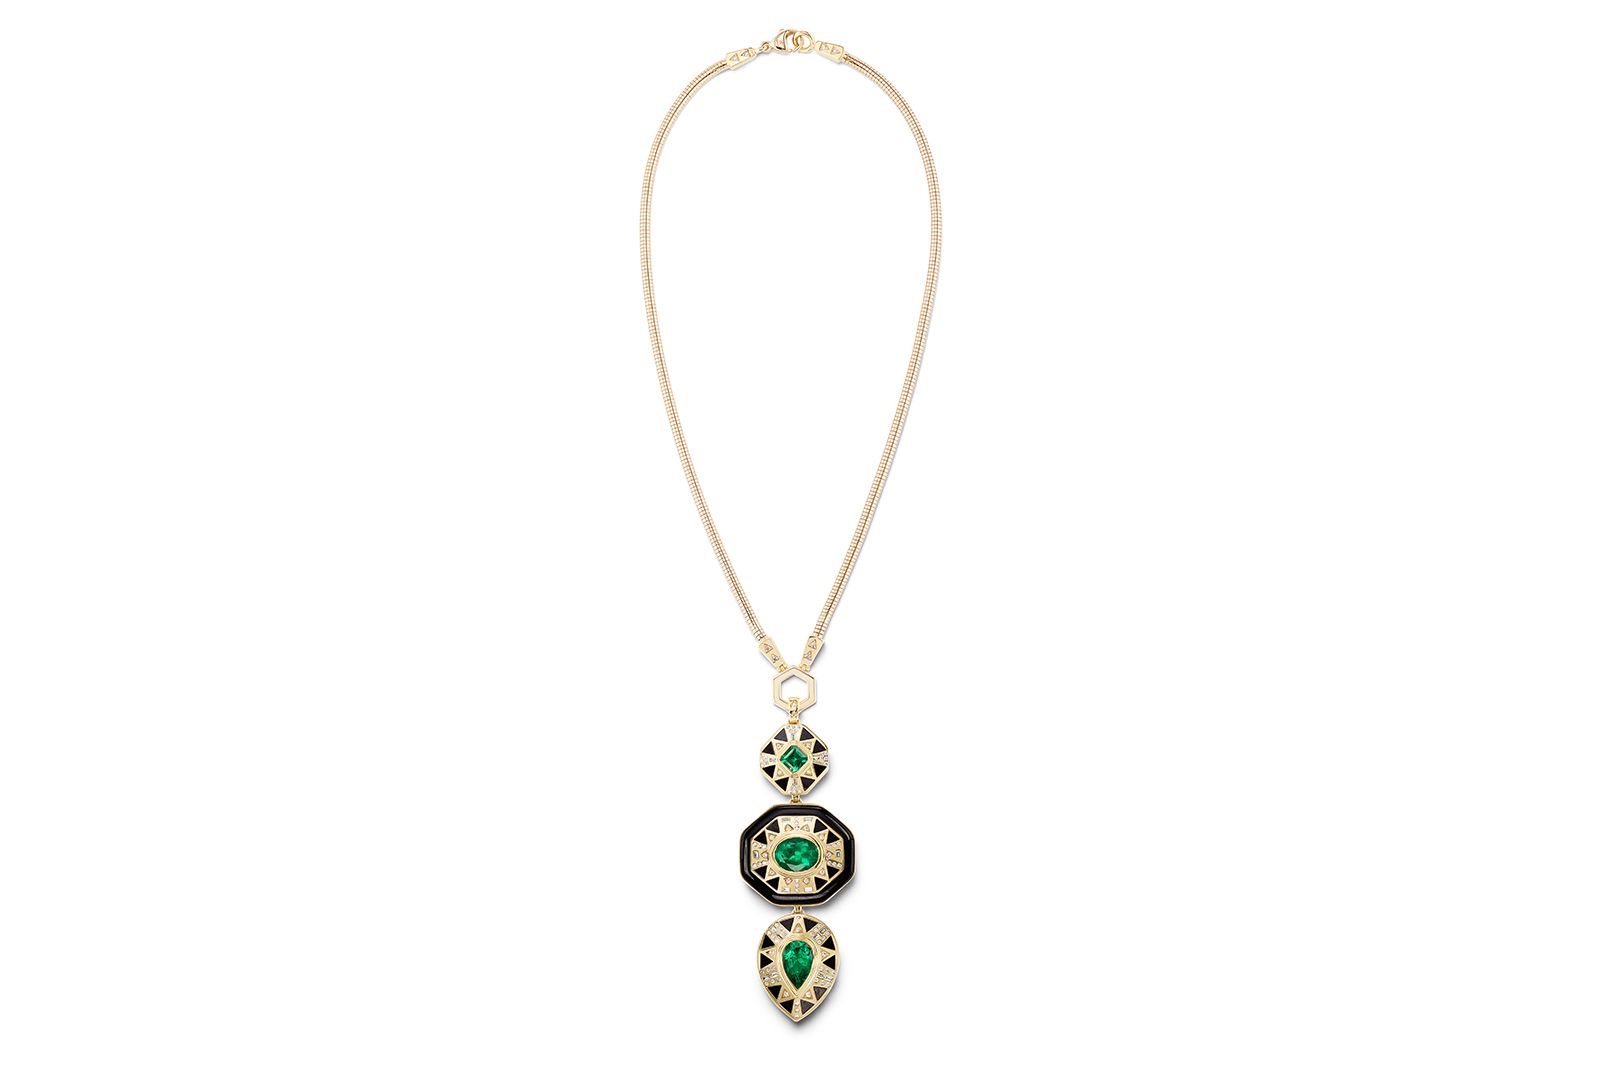 Harwell Godfrey Cleopatra’s Vault Pendant and Snake Foundation chain set with Muzo emeralds, black and white onyx and white diamonds in 18k yellow gold 